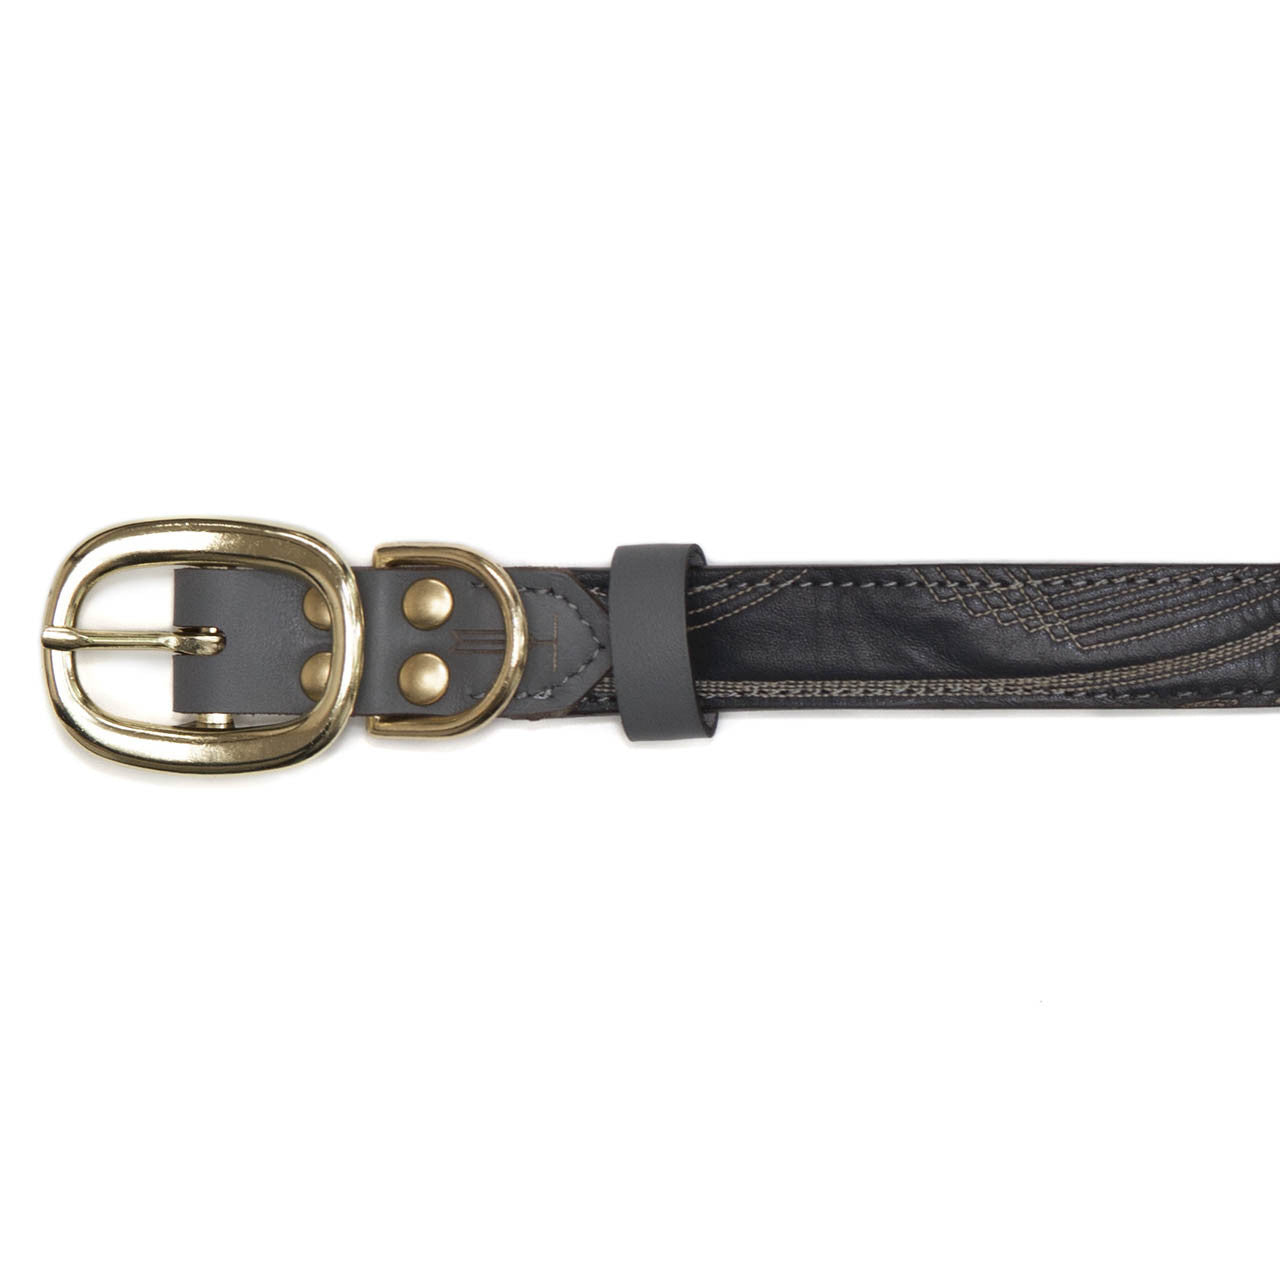 Gray Dog Collar with Navy Leather + Tan/White Stitching (buckle)